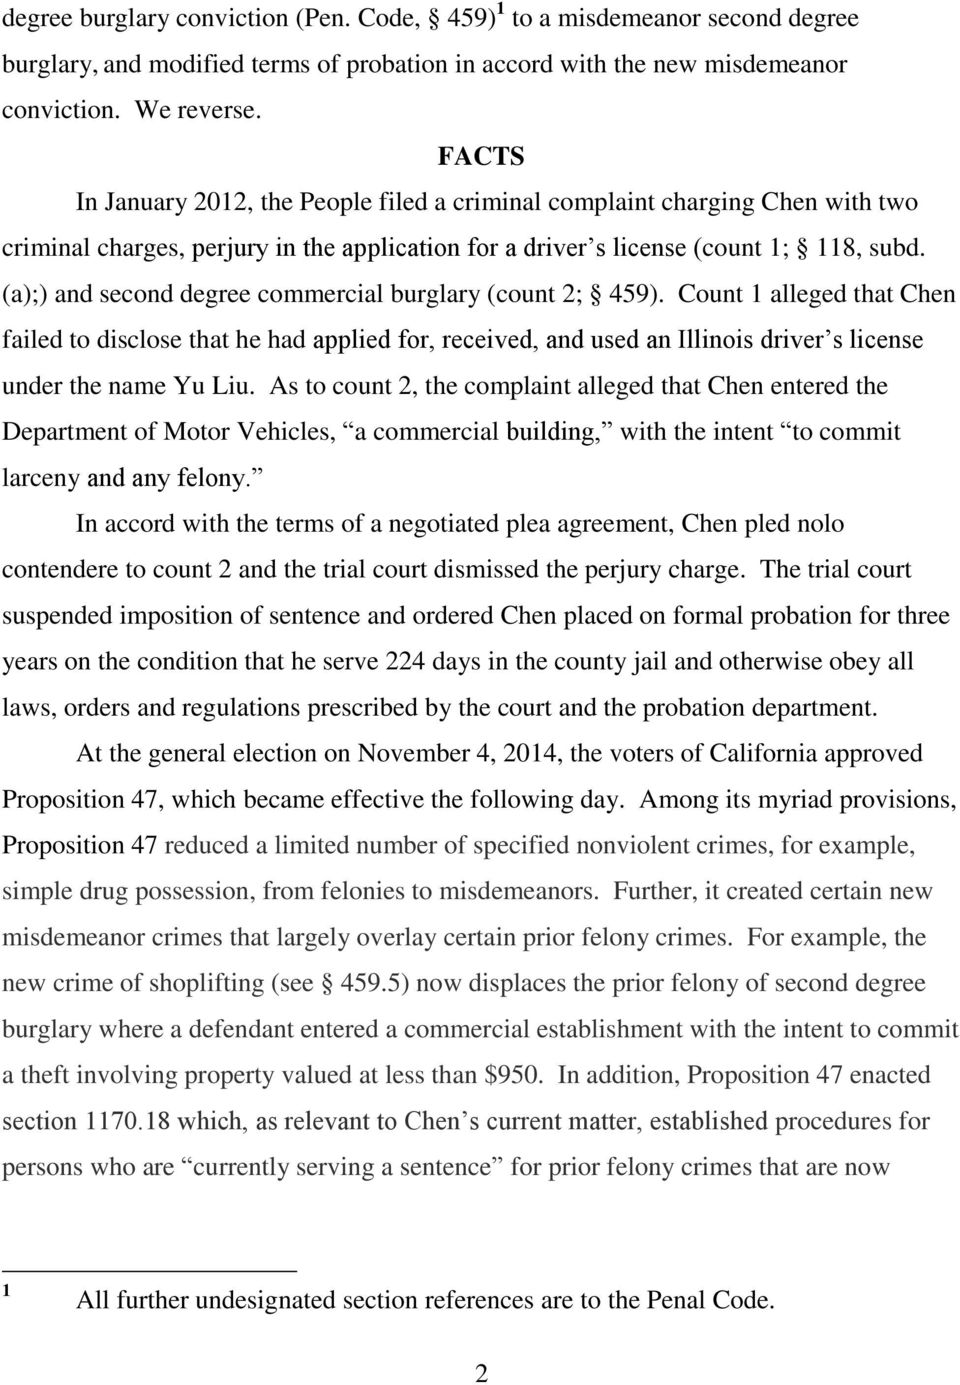 (a);) and second degree commercial burglary (count 2; 459). Count 1 alleged that Chen failed to disclose that he had applied for, received, and used an Illinois driver s license under the name Yu Liu.